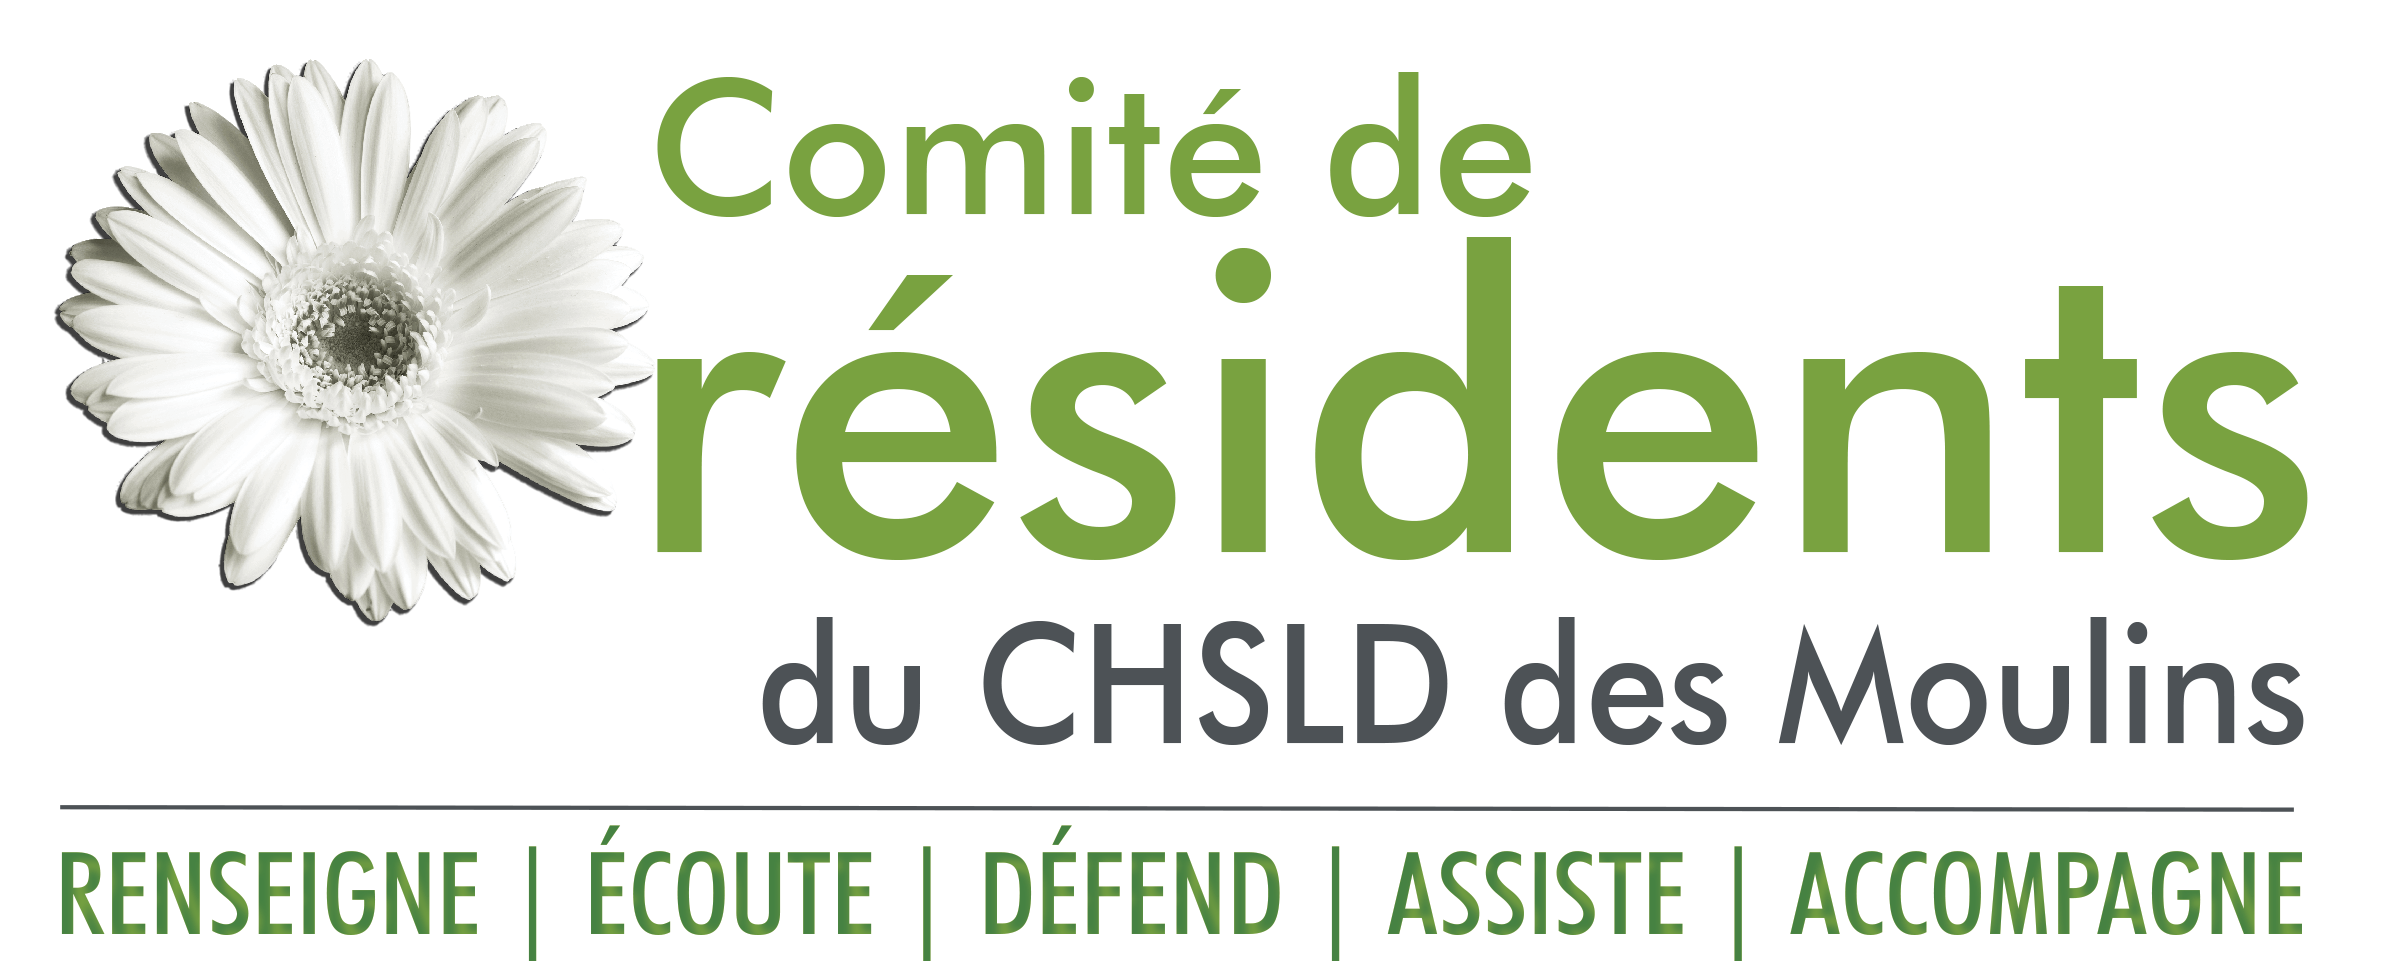 logo-comite-residents-moulins